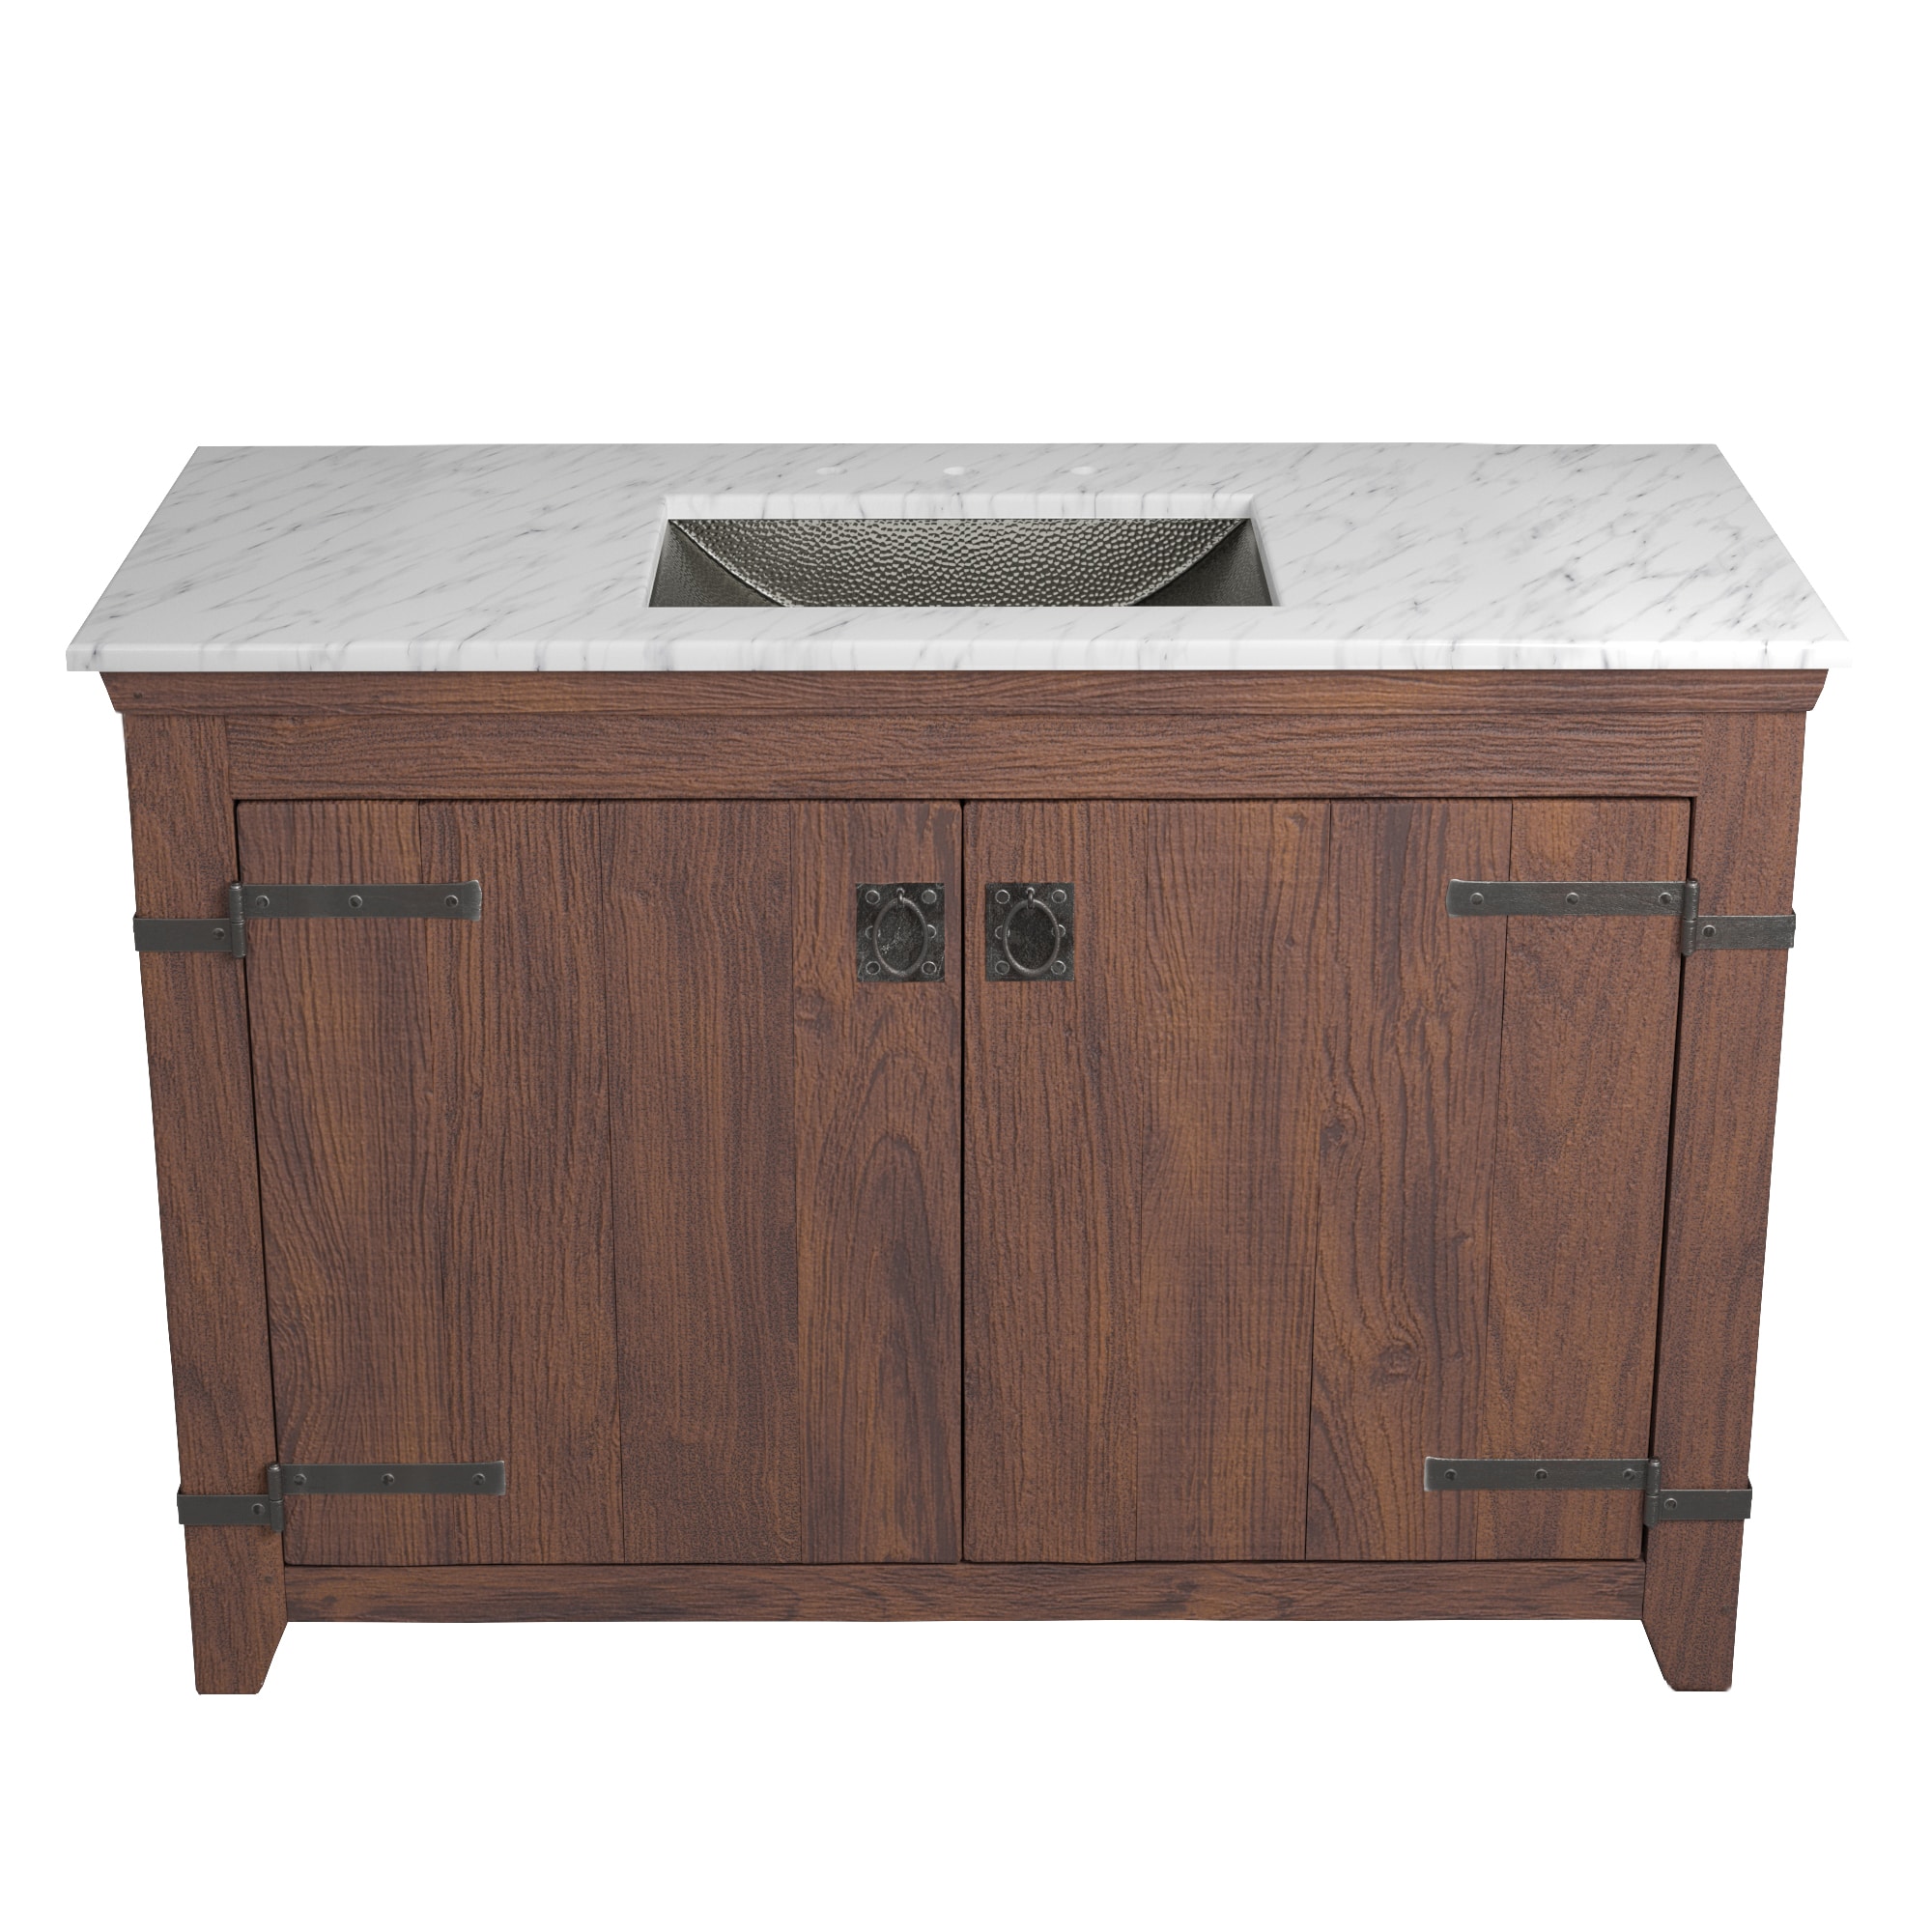 Native Trails 48" Americana Vanity in Chestnut with Carrara Marble Top and Avila in Polished Nickel, 8" Widespread Faucet Holes, BND48-VB-CT-CP-028